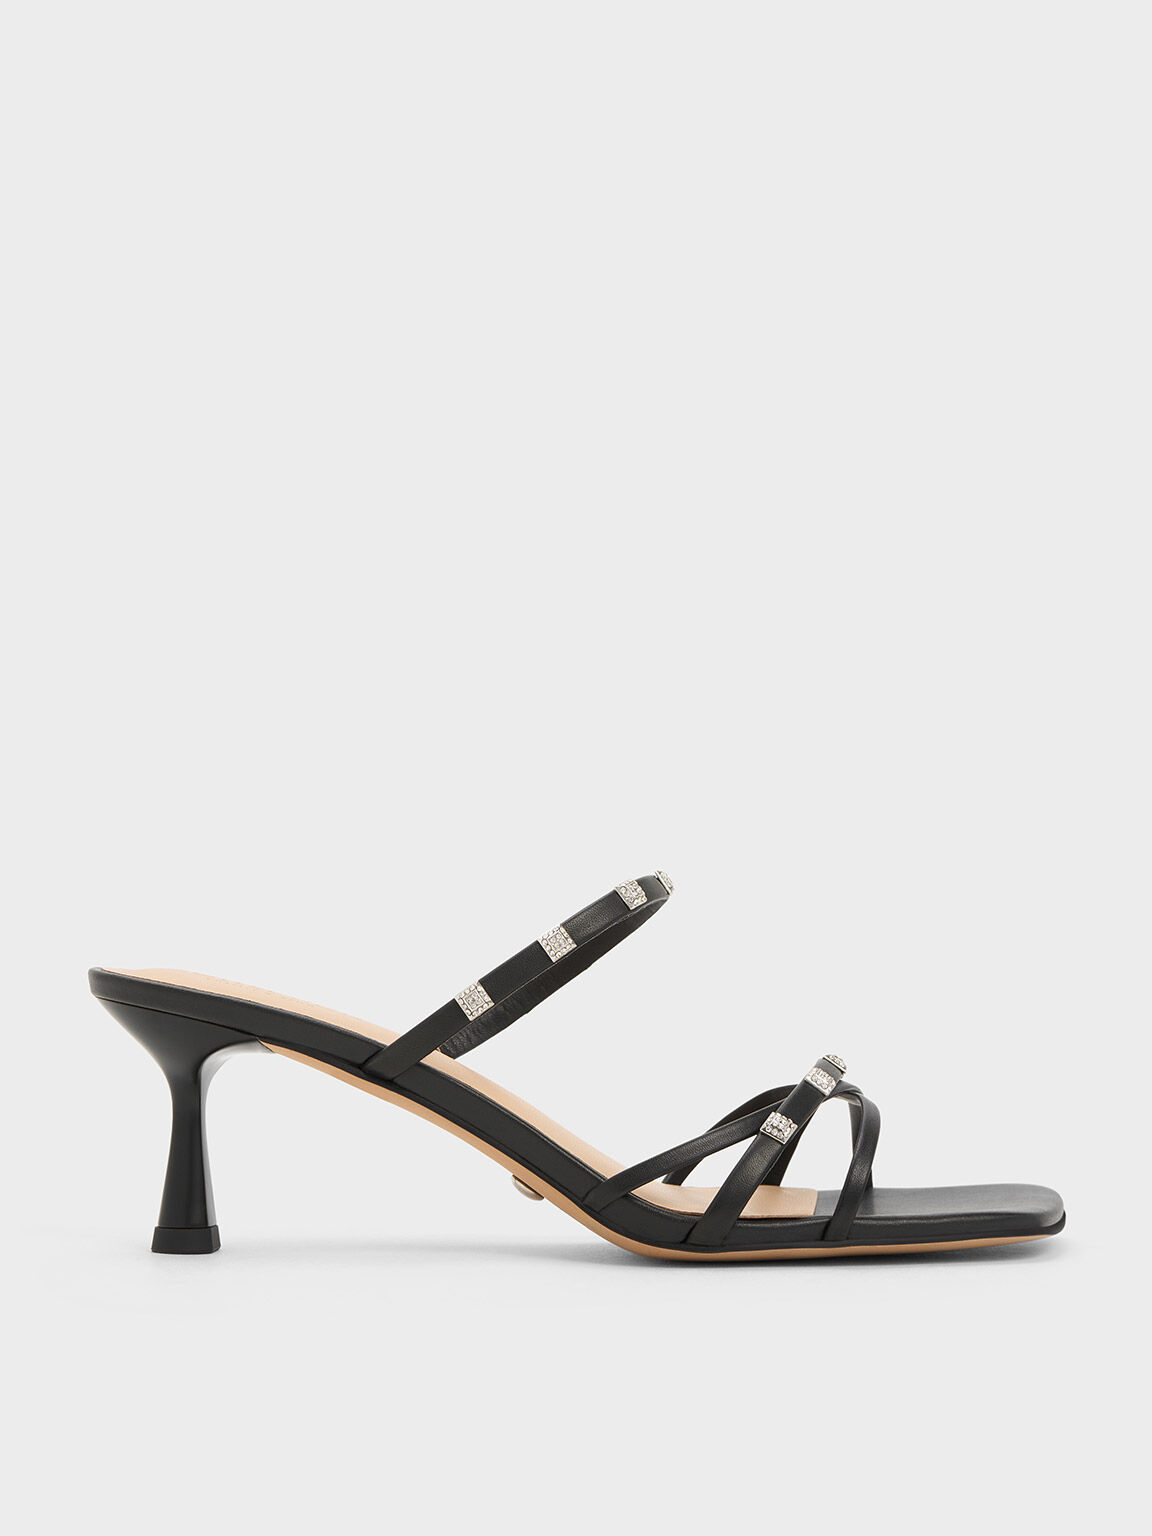 Women's Mules | Shop Exclusive Styles | CHARLES & KEITH CA